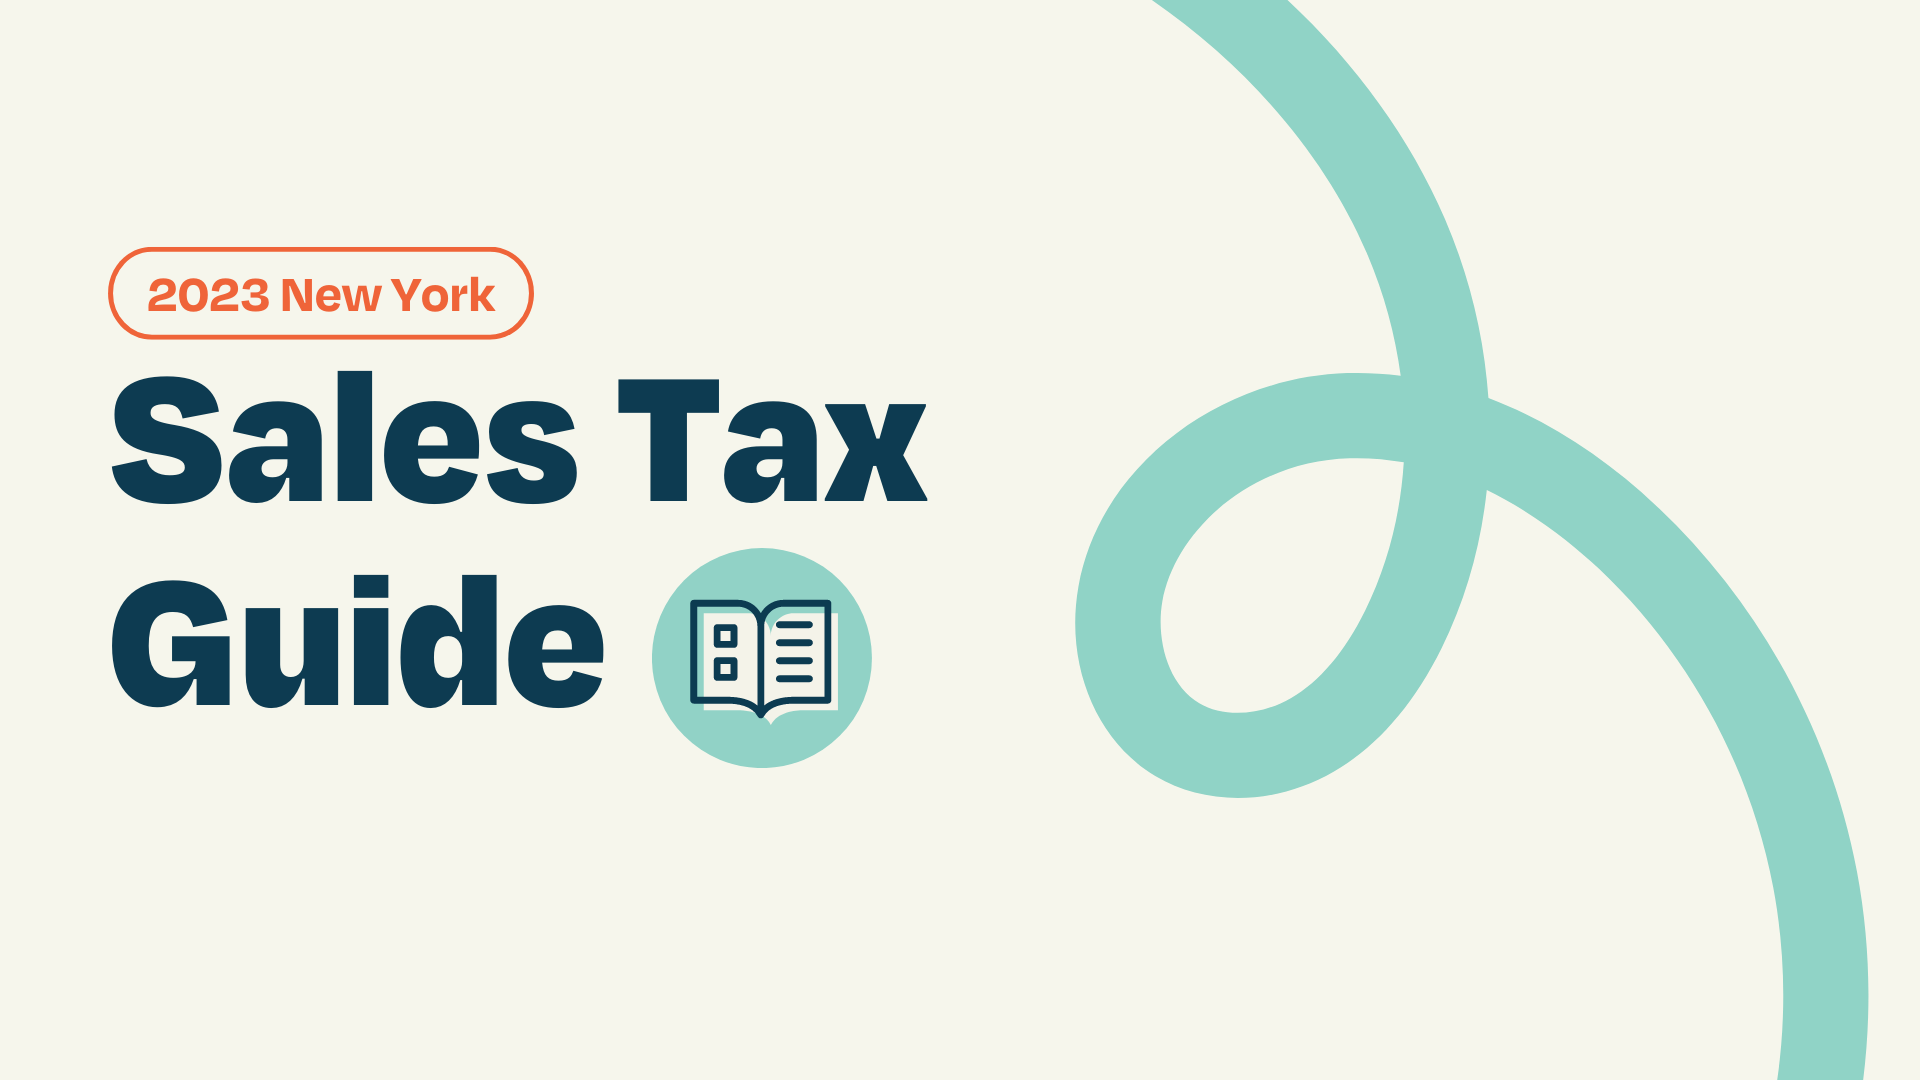 New York 2023 Sales Tax Guide